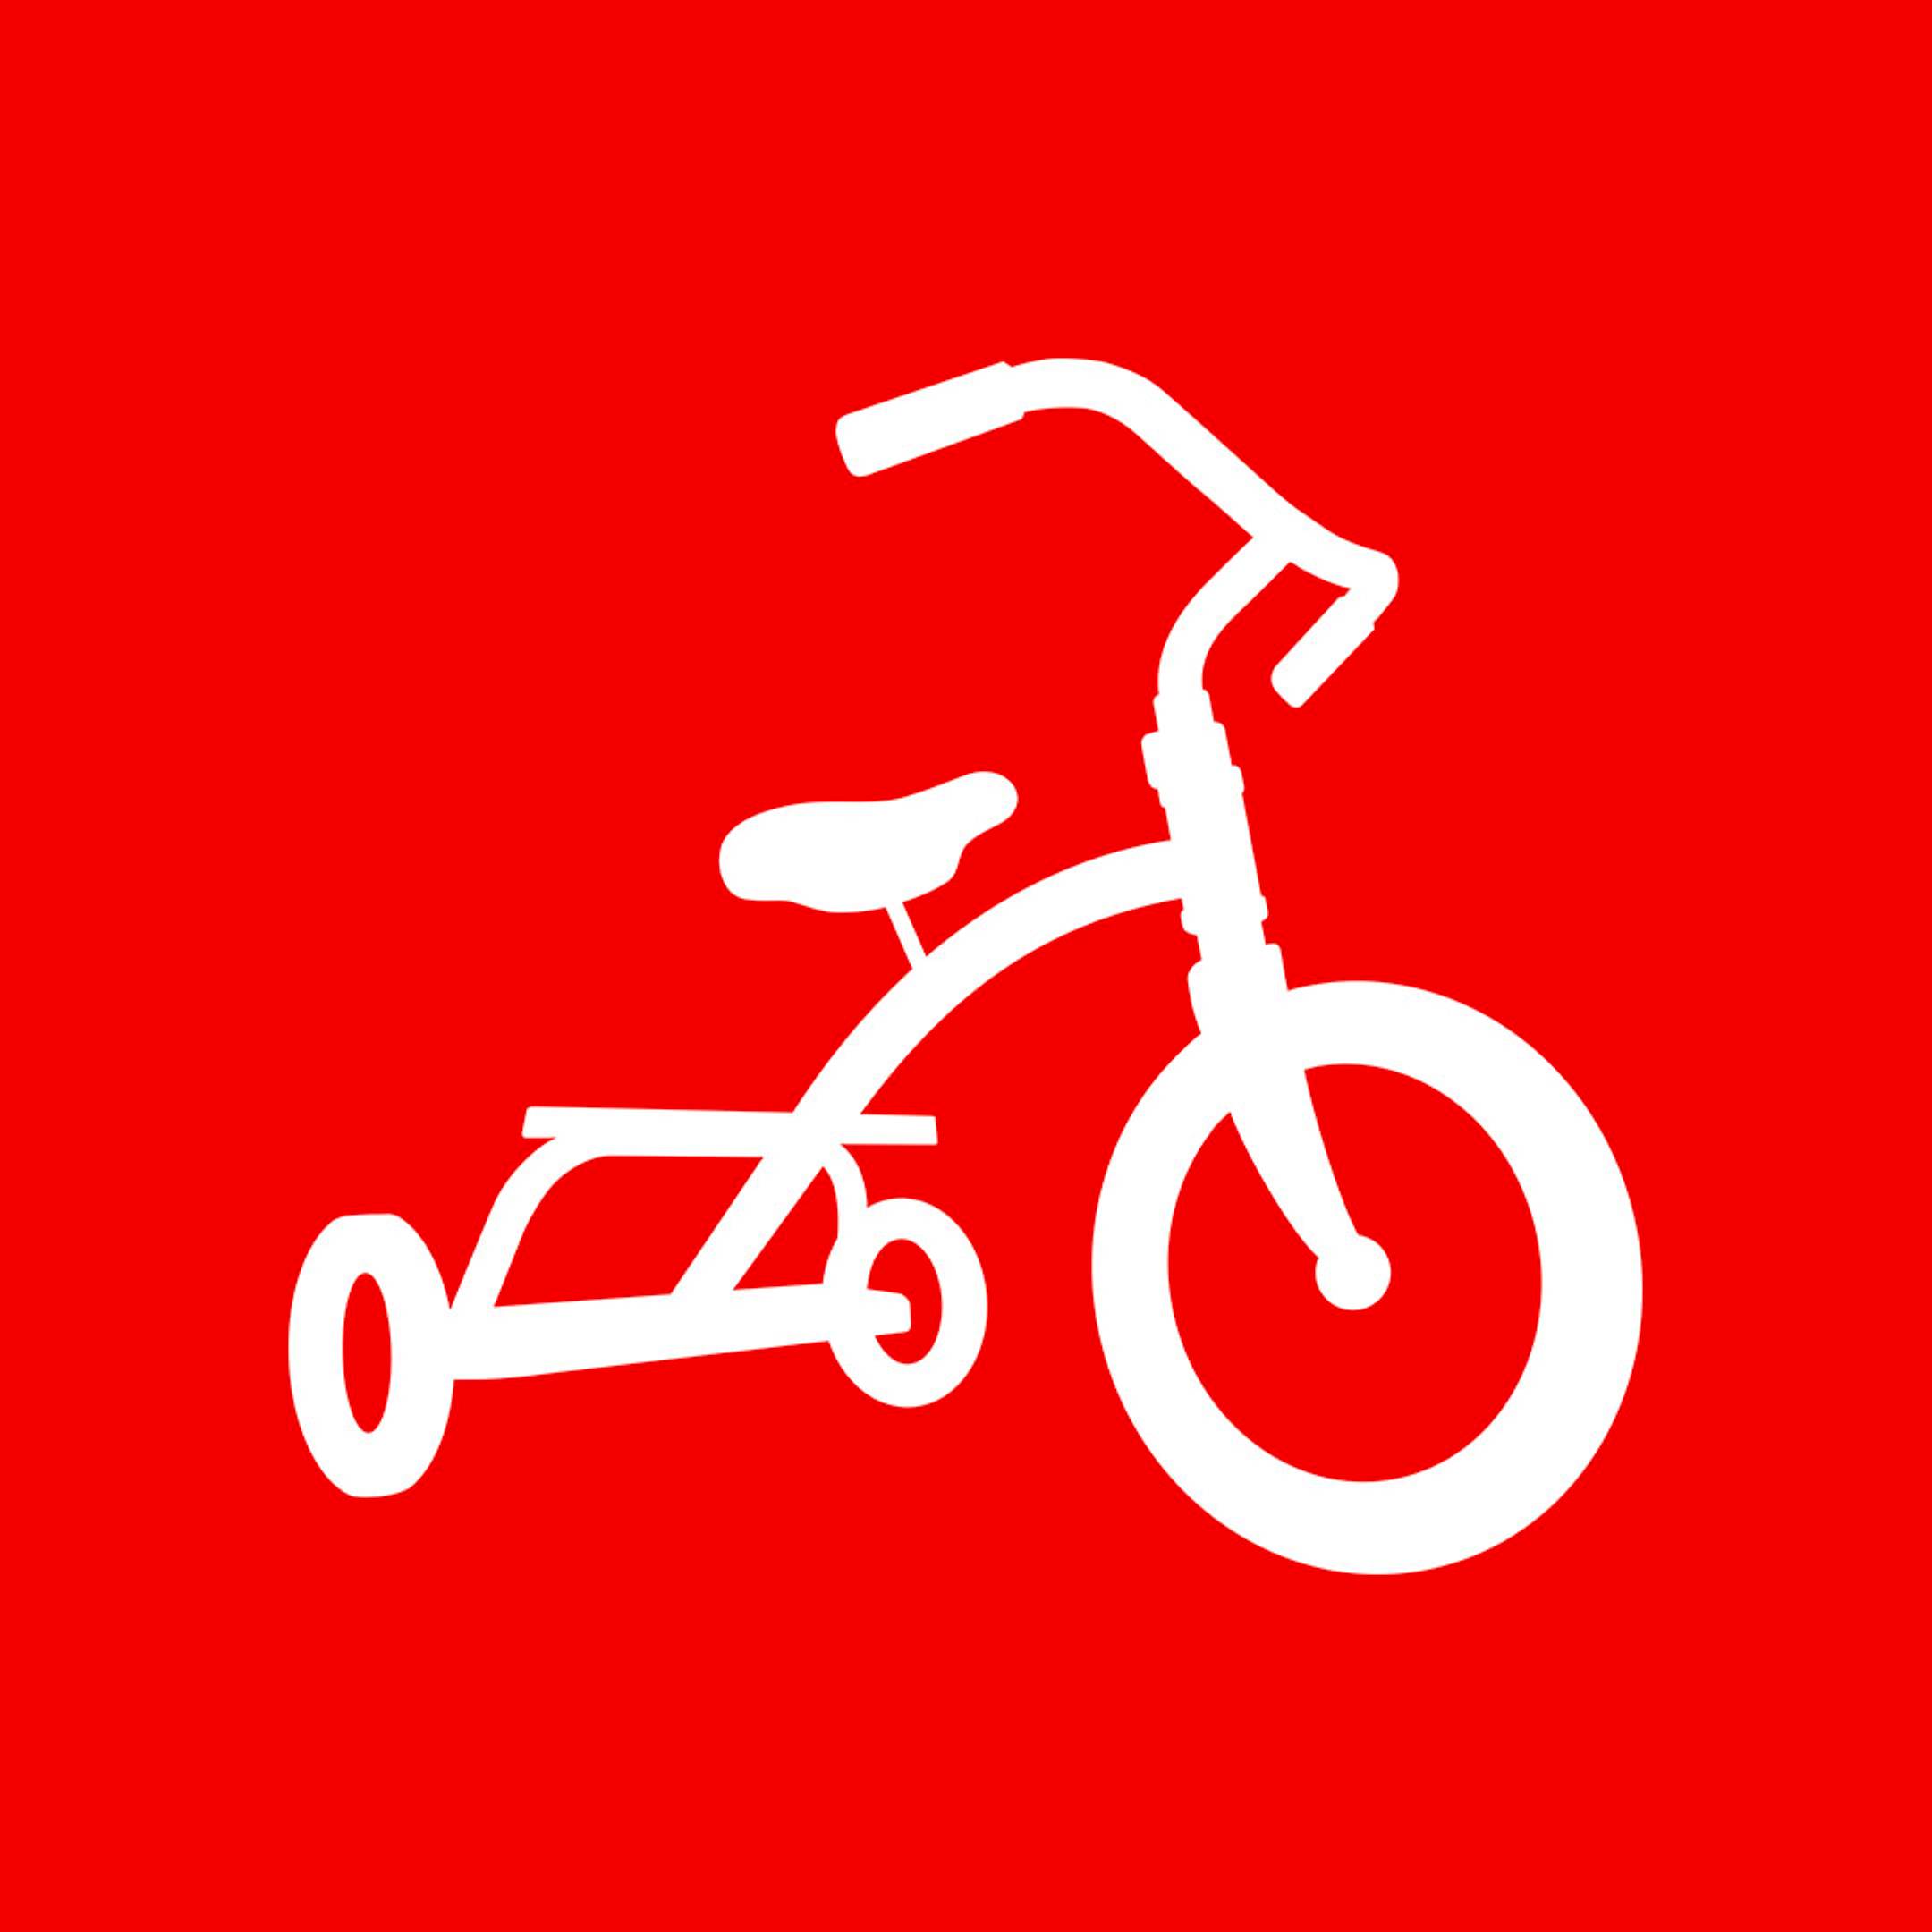 Redtricycle logo on red background 